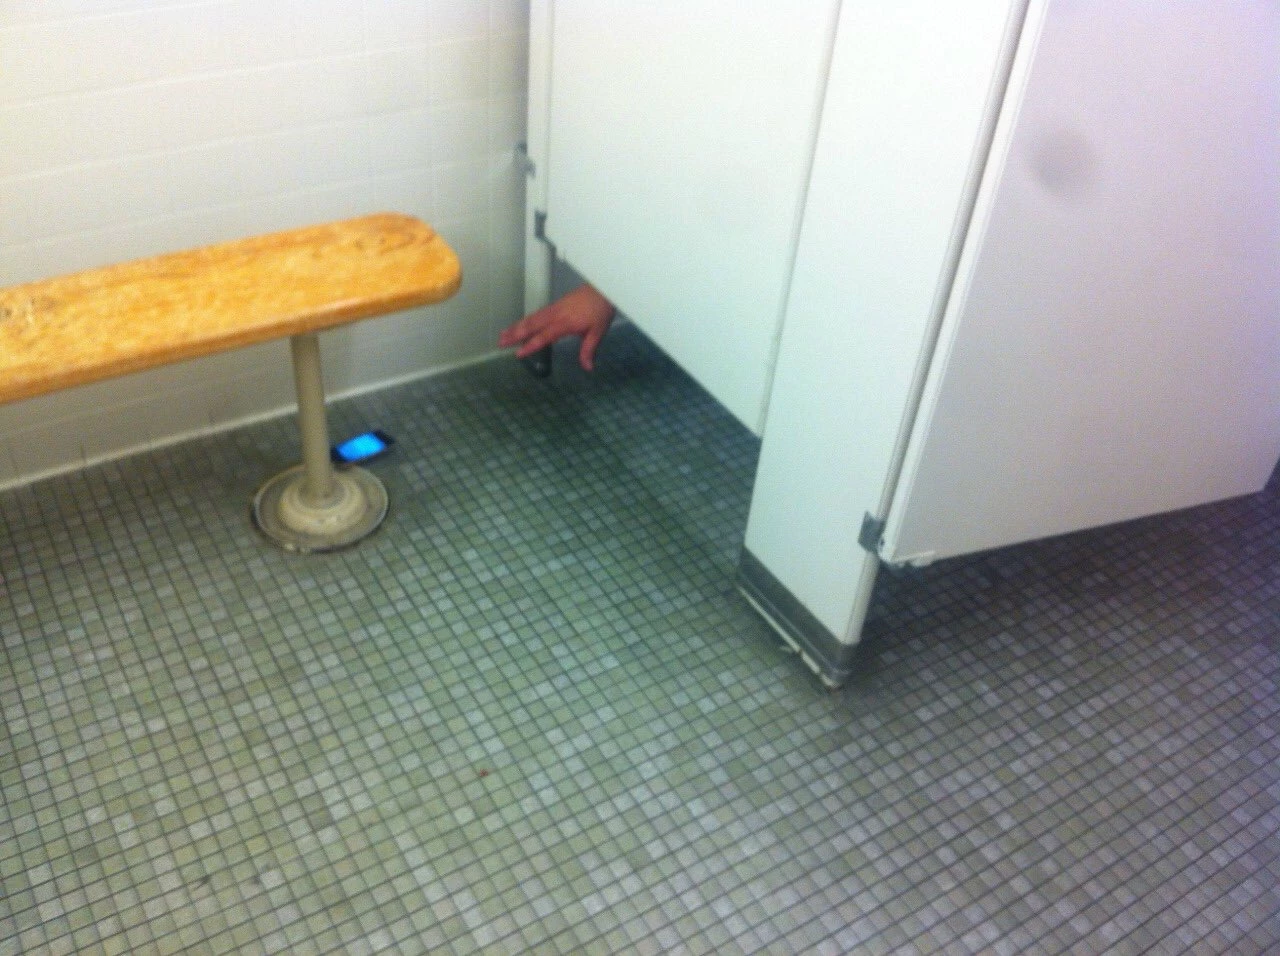 The Worst Possible Situation In A Public Restroom